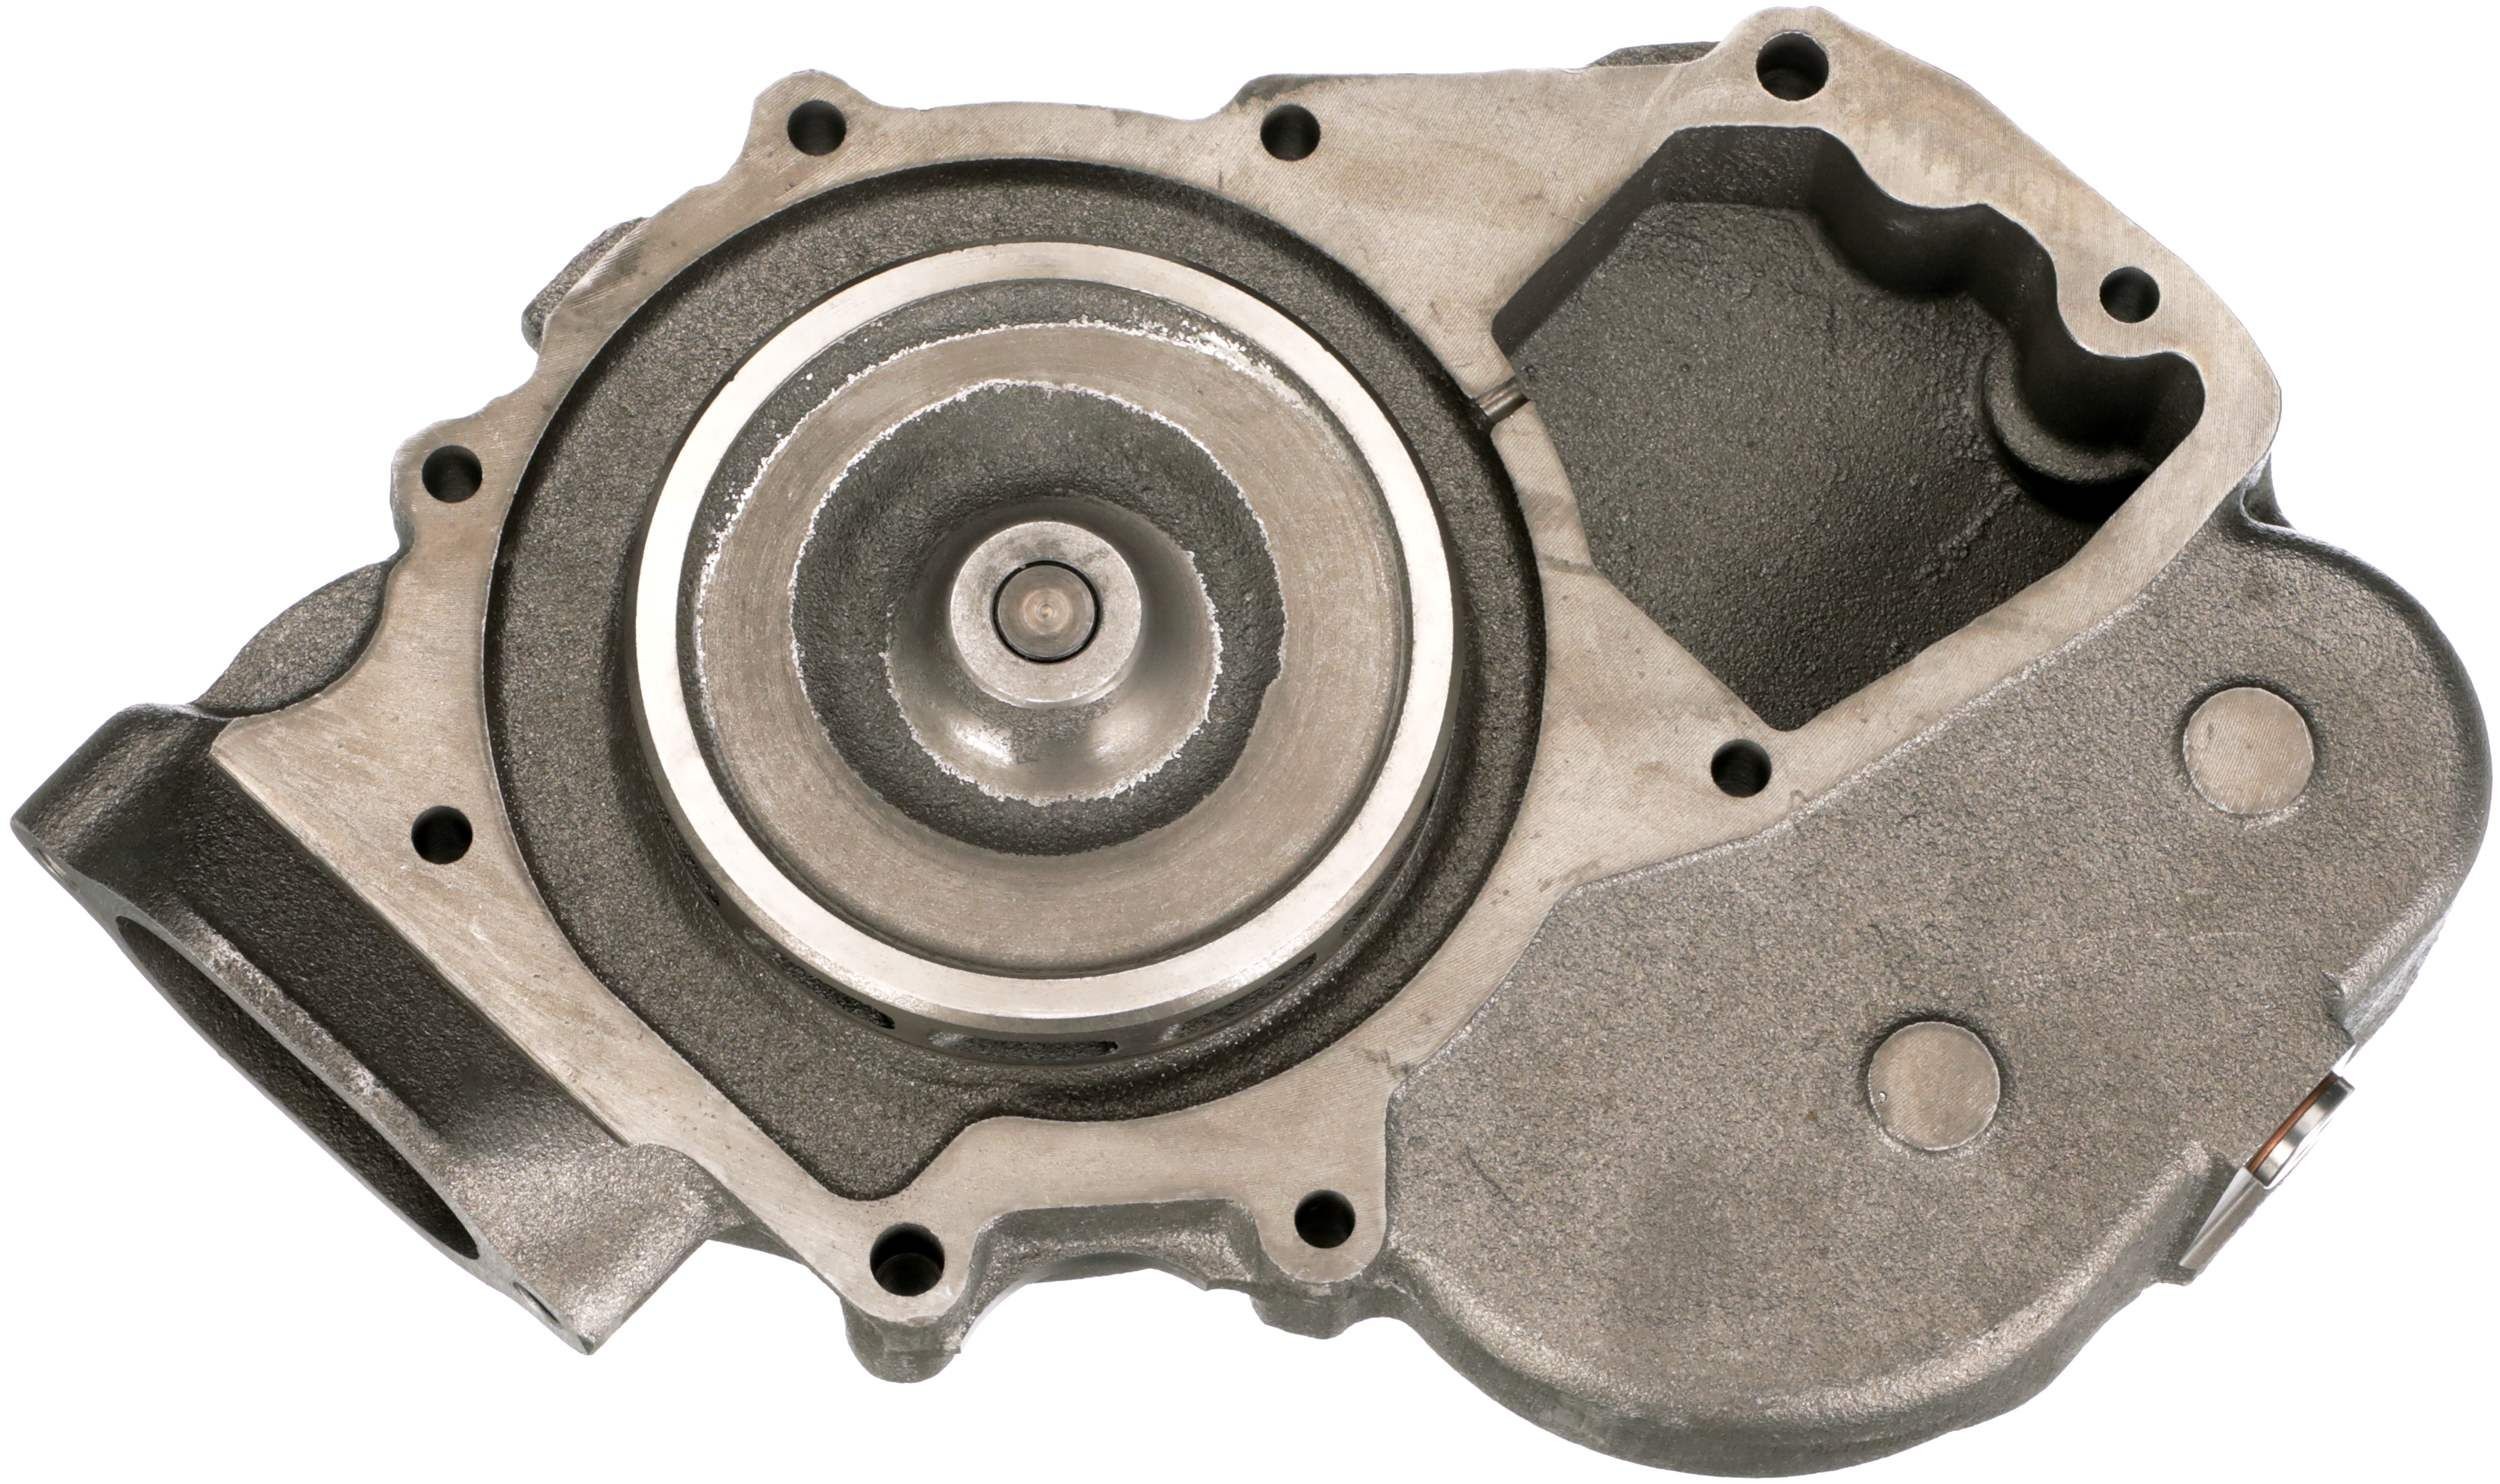 GATES 7702-15064 Water pump Metal, without belt pulley, for v-ribbed belt pulley, with gaskets/seals